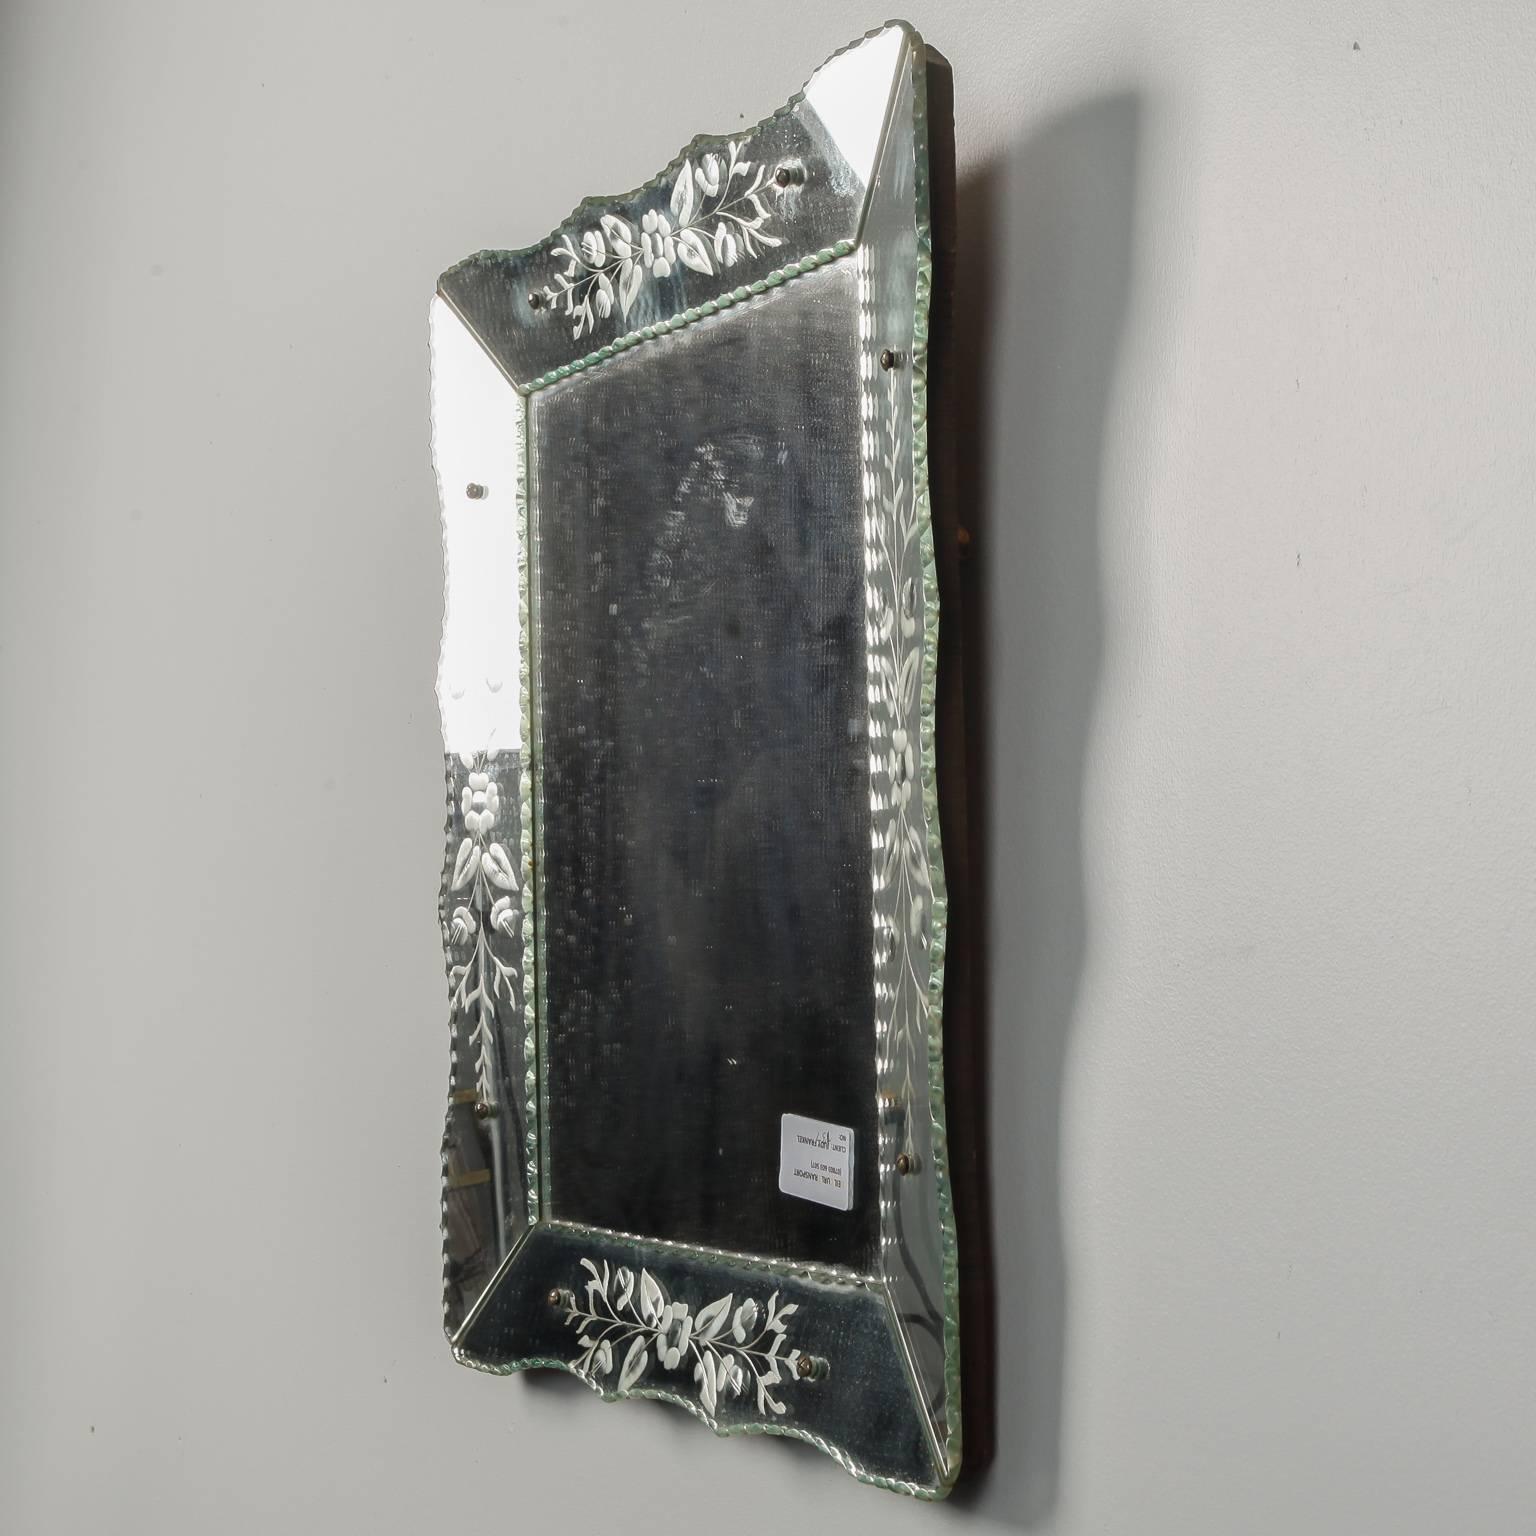 Rectangular venetian mirror with scalloped inner and outer edge, circa 1930s. Etched floral spray on frame. Mirror can be hung vertically or horizontally.  Actual Mirror Size:  14.5” h x 22.75” w